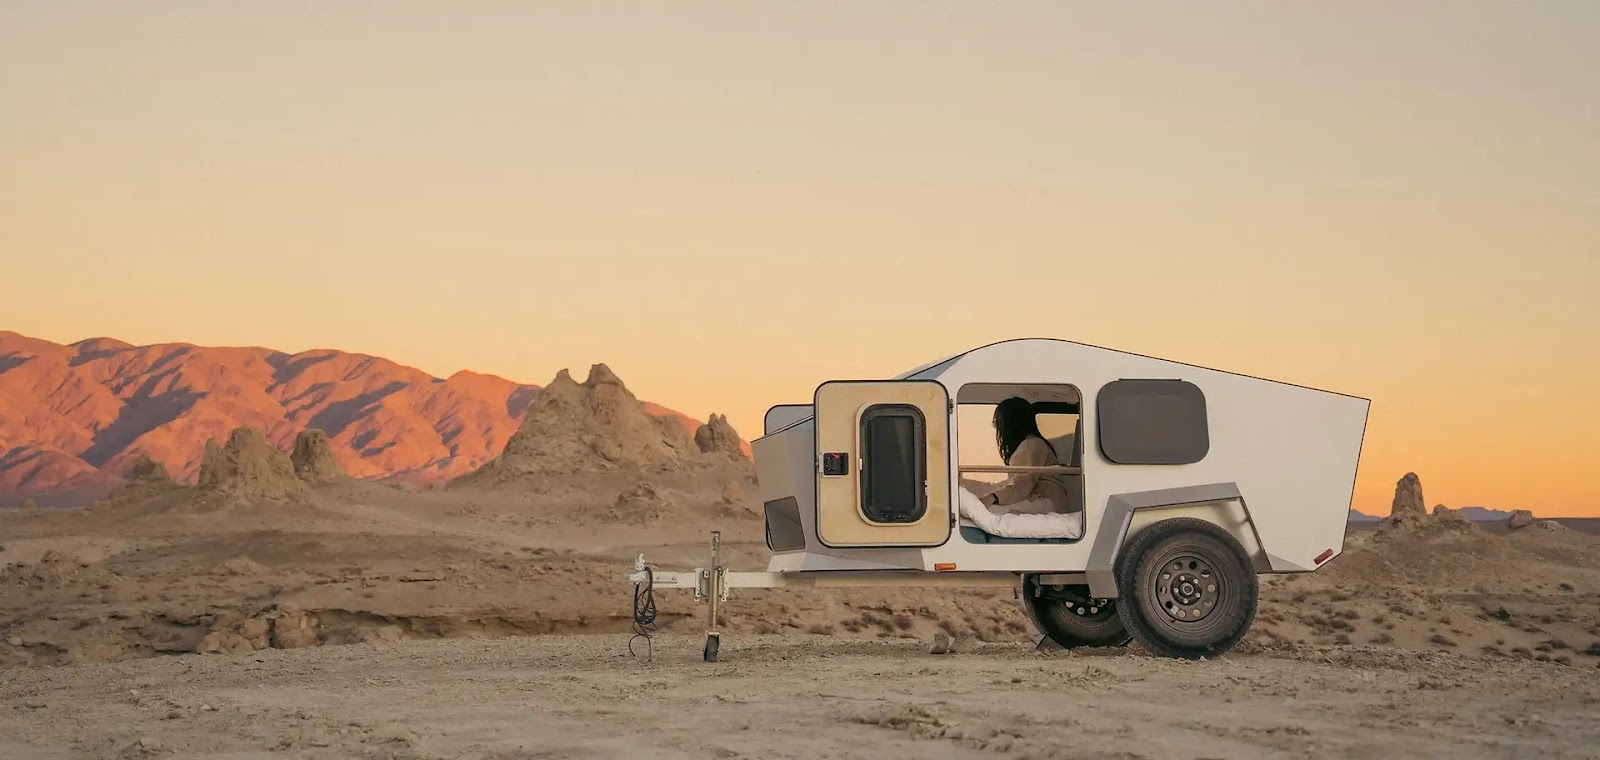 Off road travel trailer